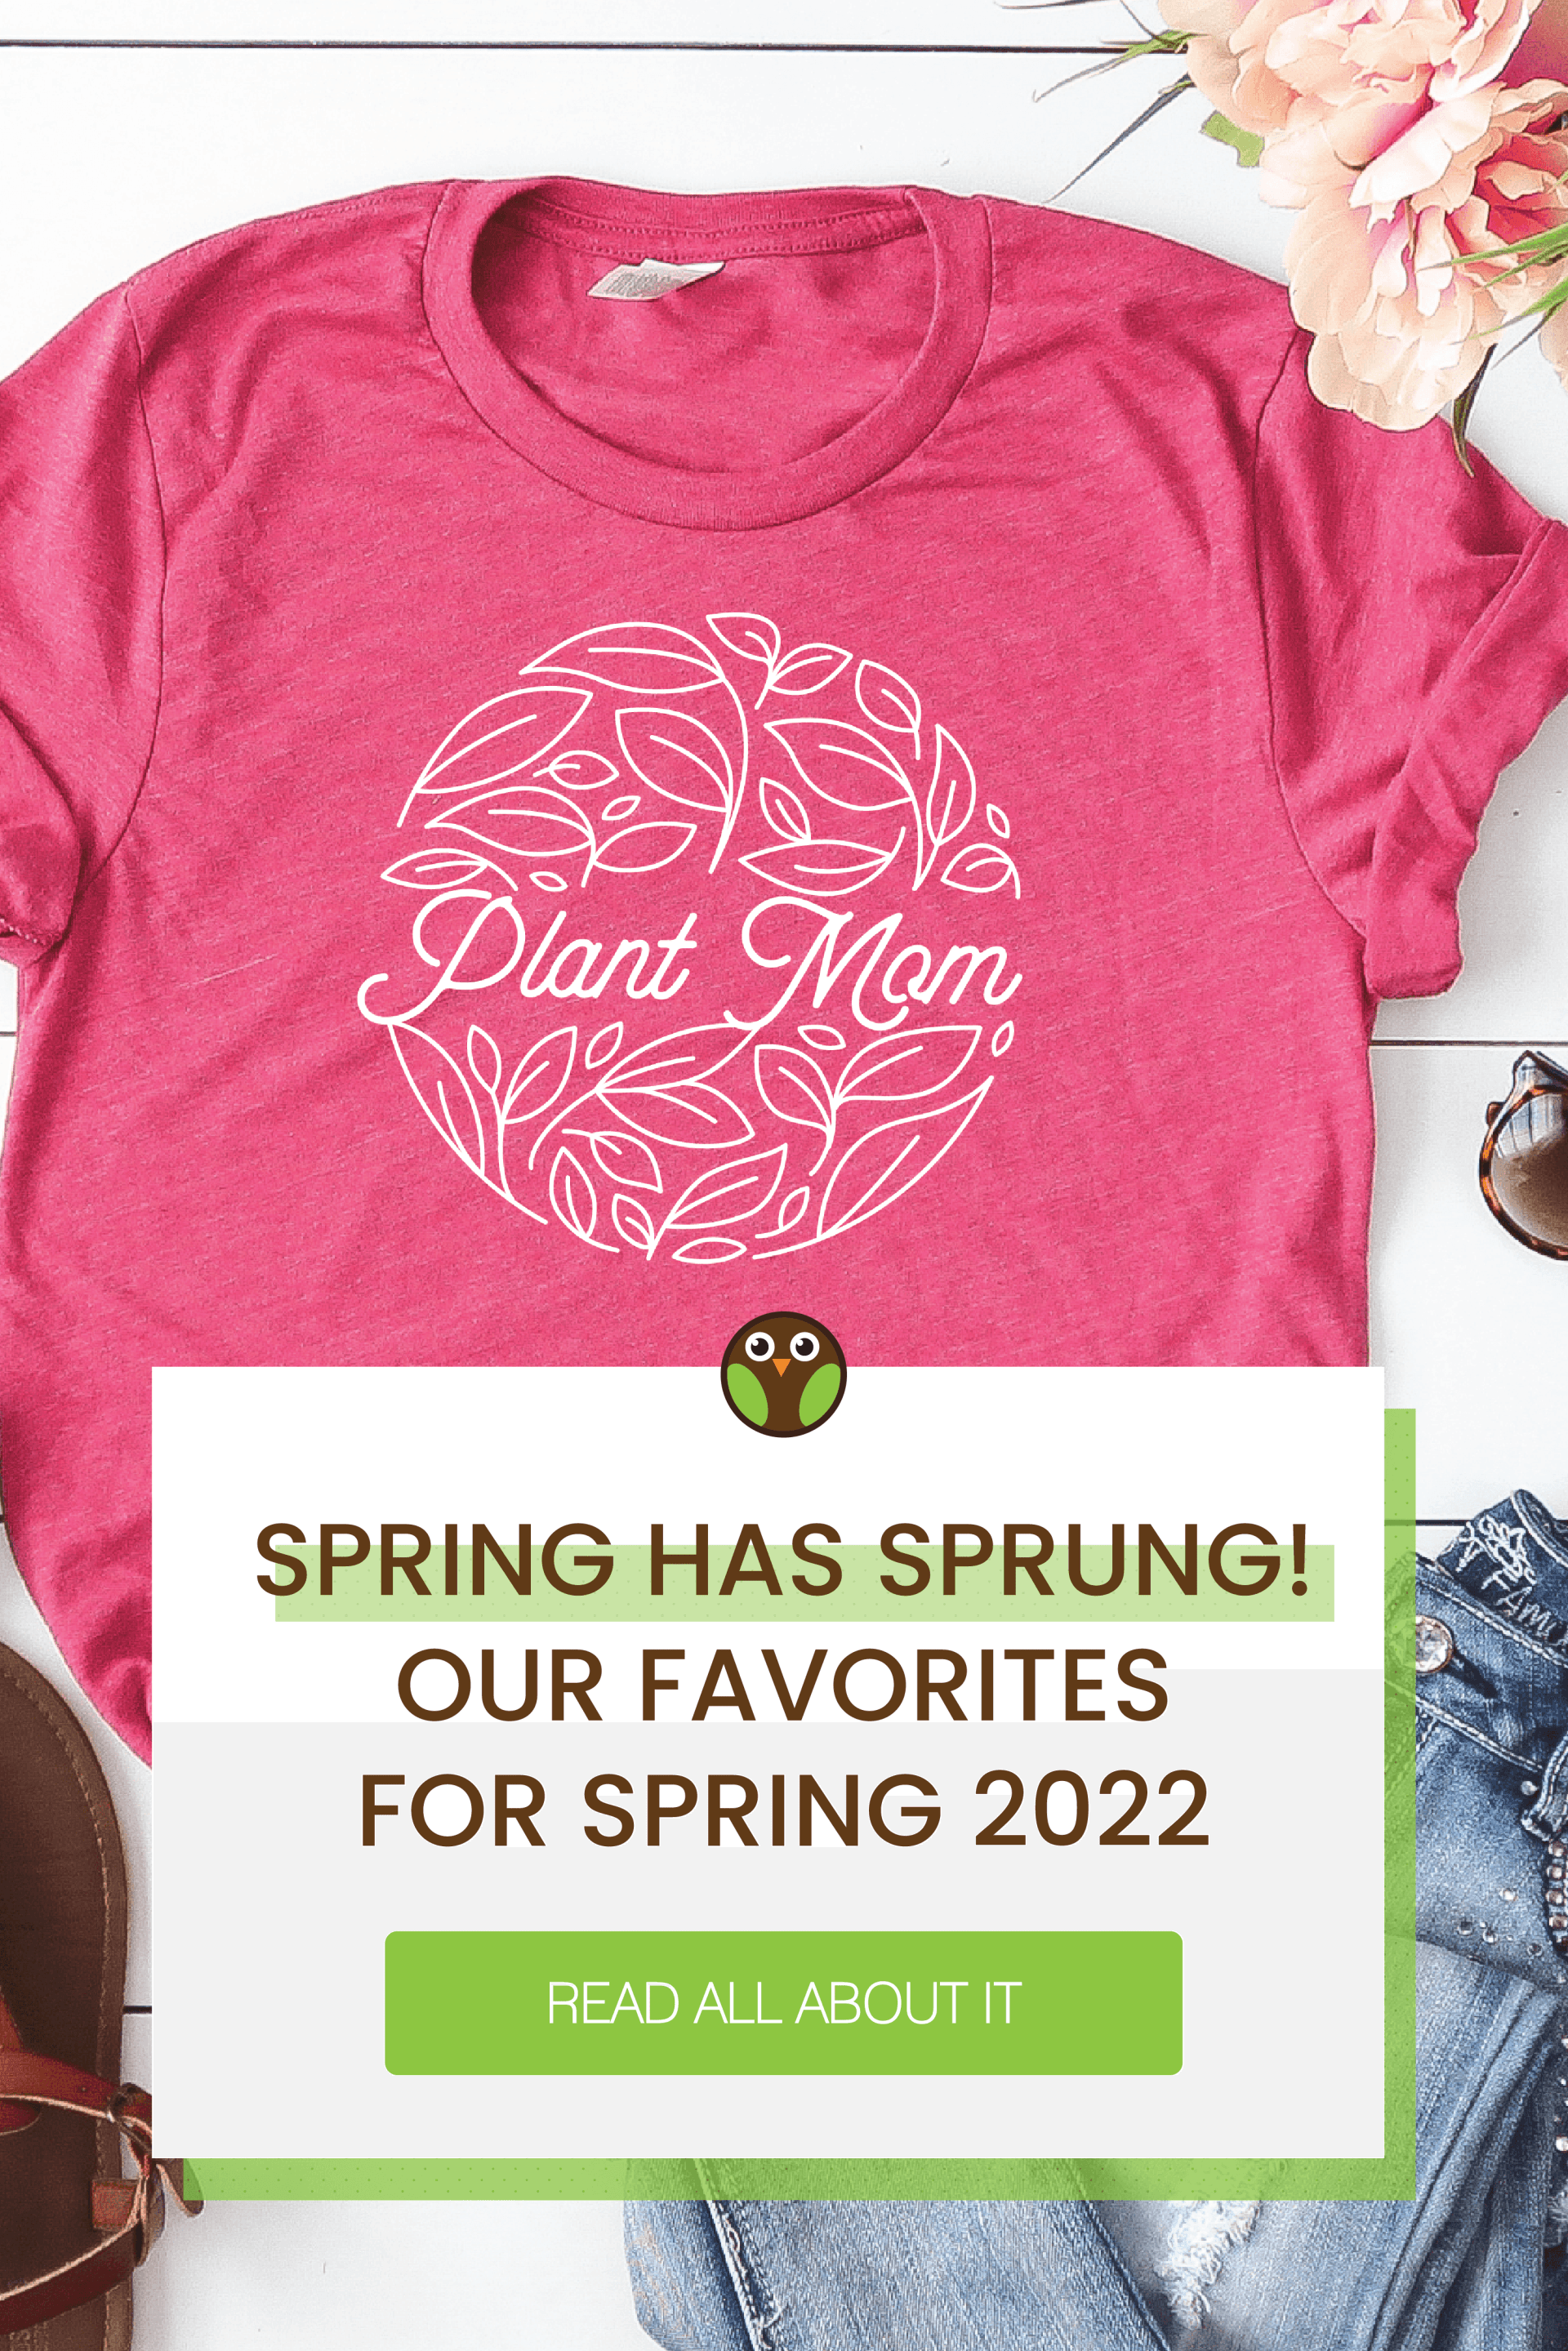 Spring has Sprung! Our favorites for Spring 2022